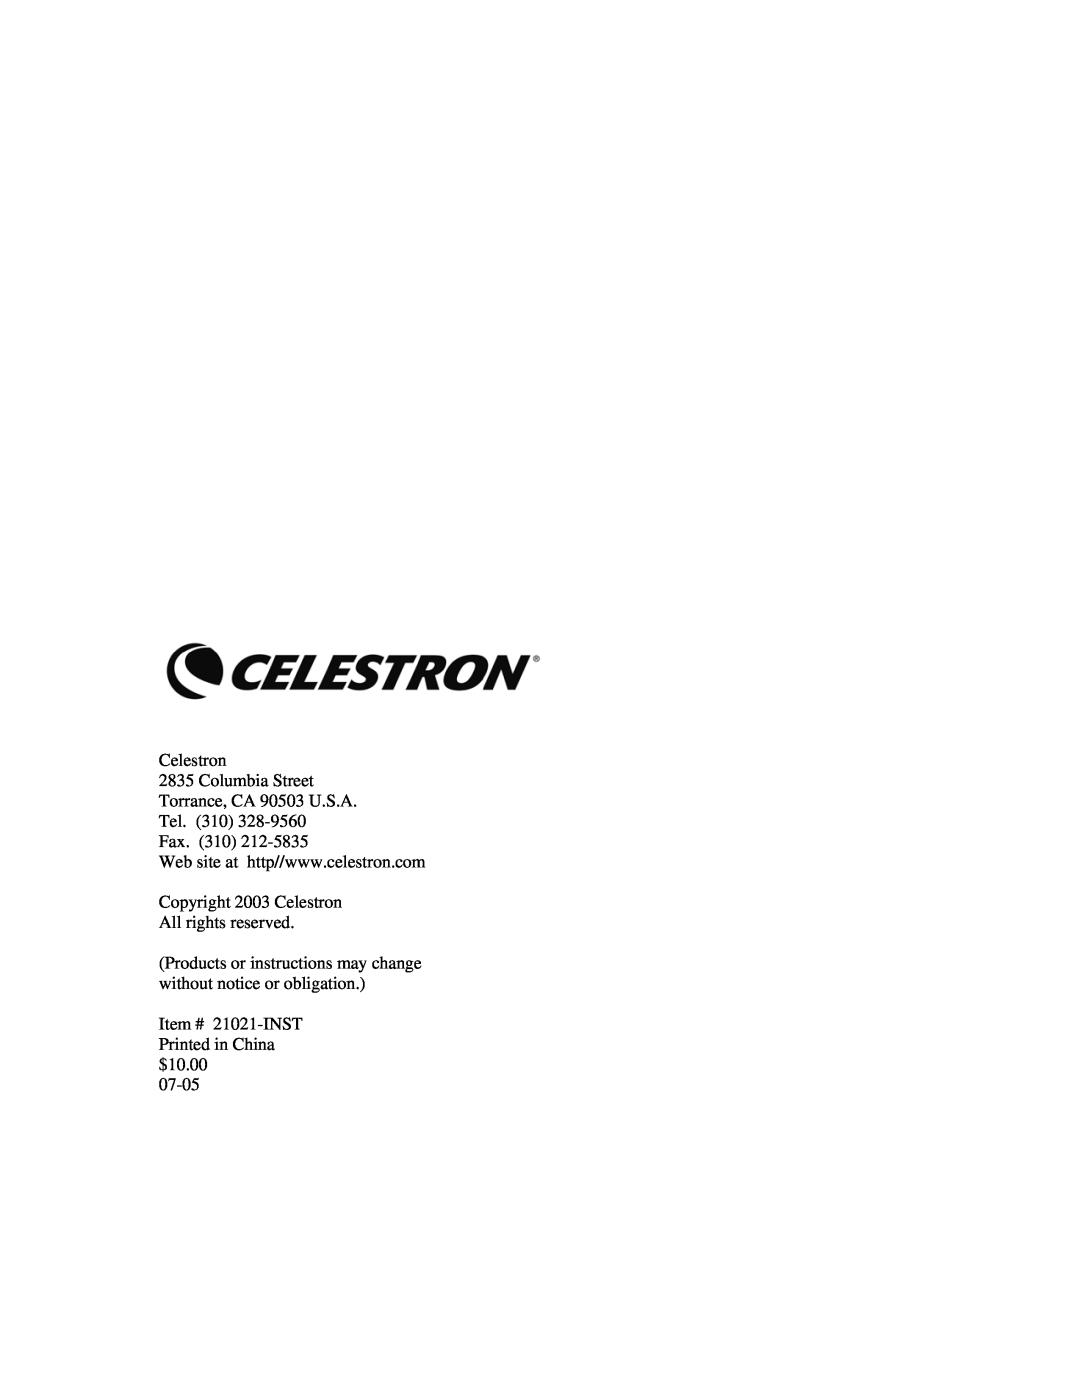 Celestron C100ED-R, C80ED-R Copyright 2003 Celestron All rights reserved, Item # 21021-INSTPrinted in China $10.00 